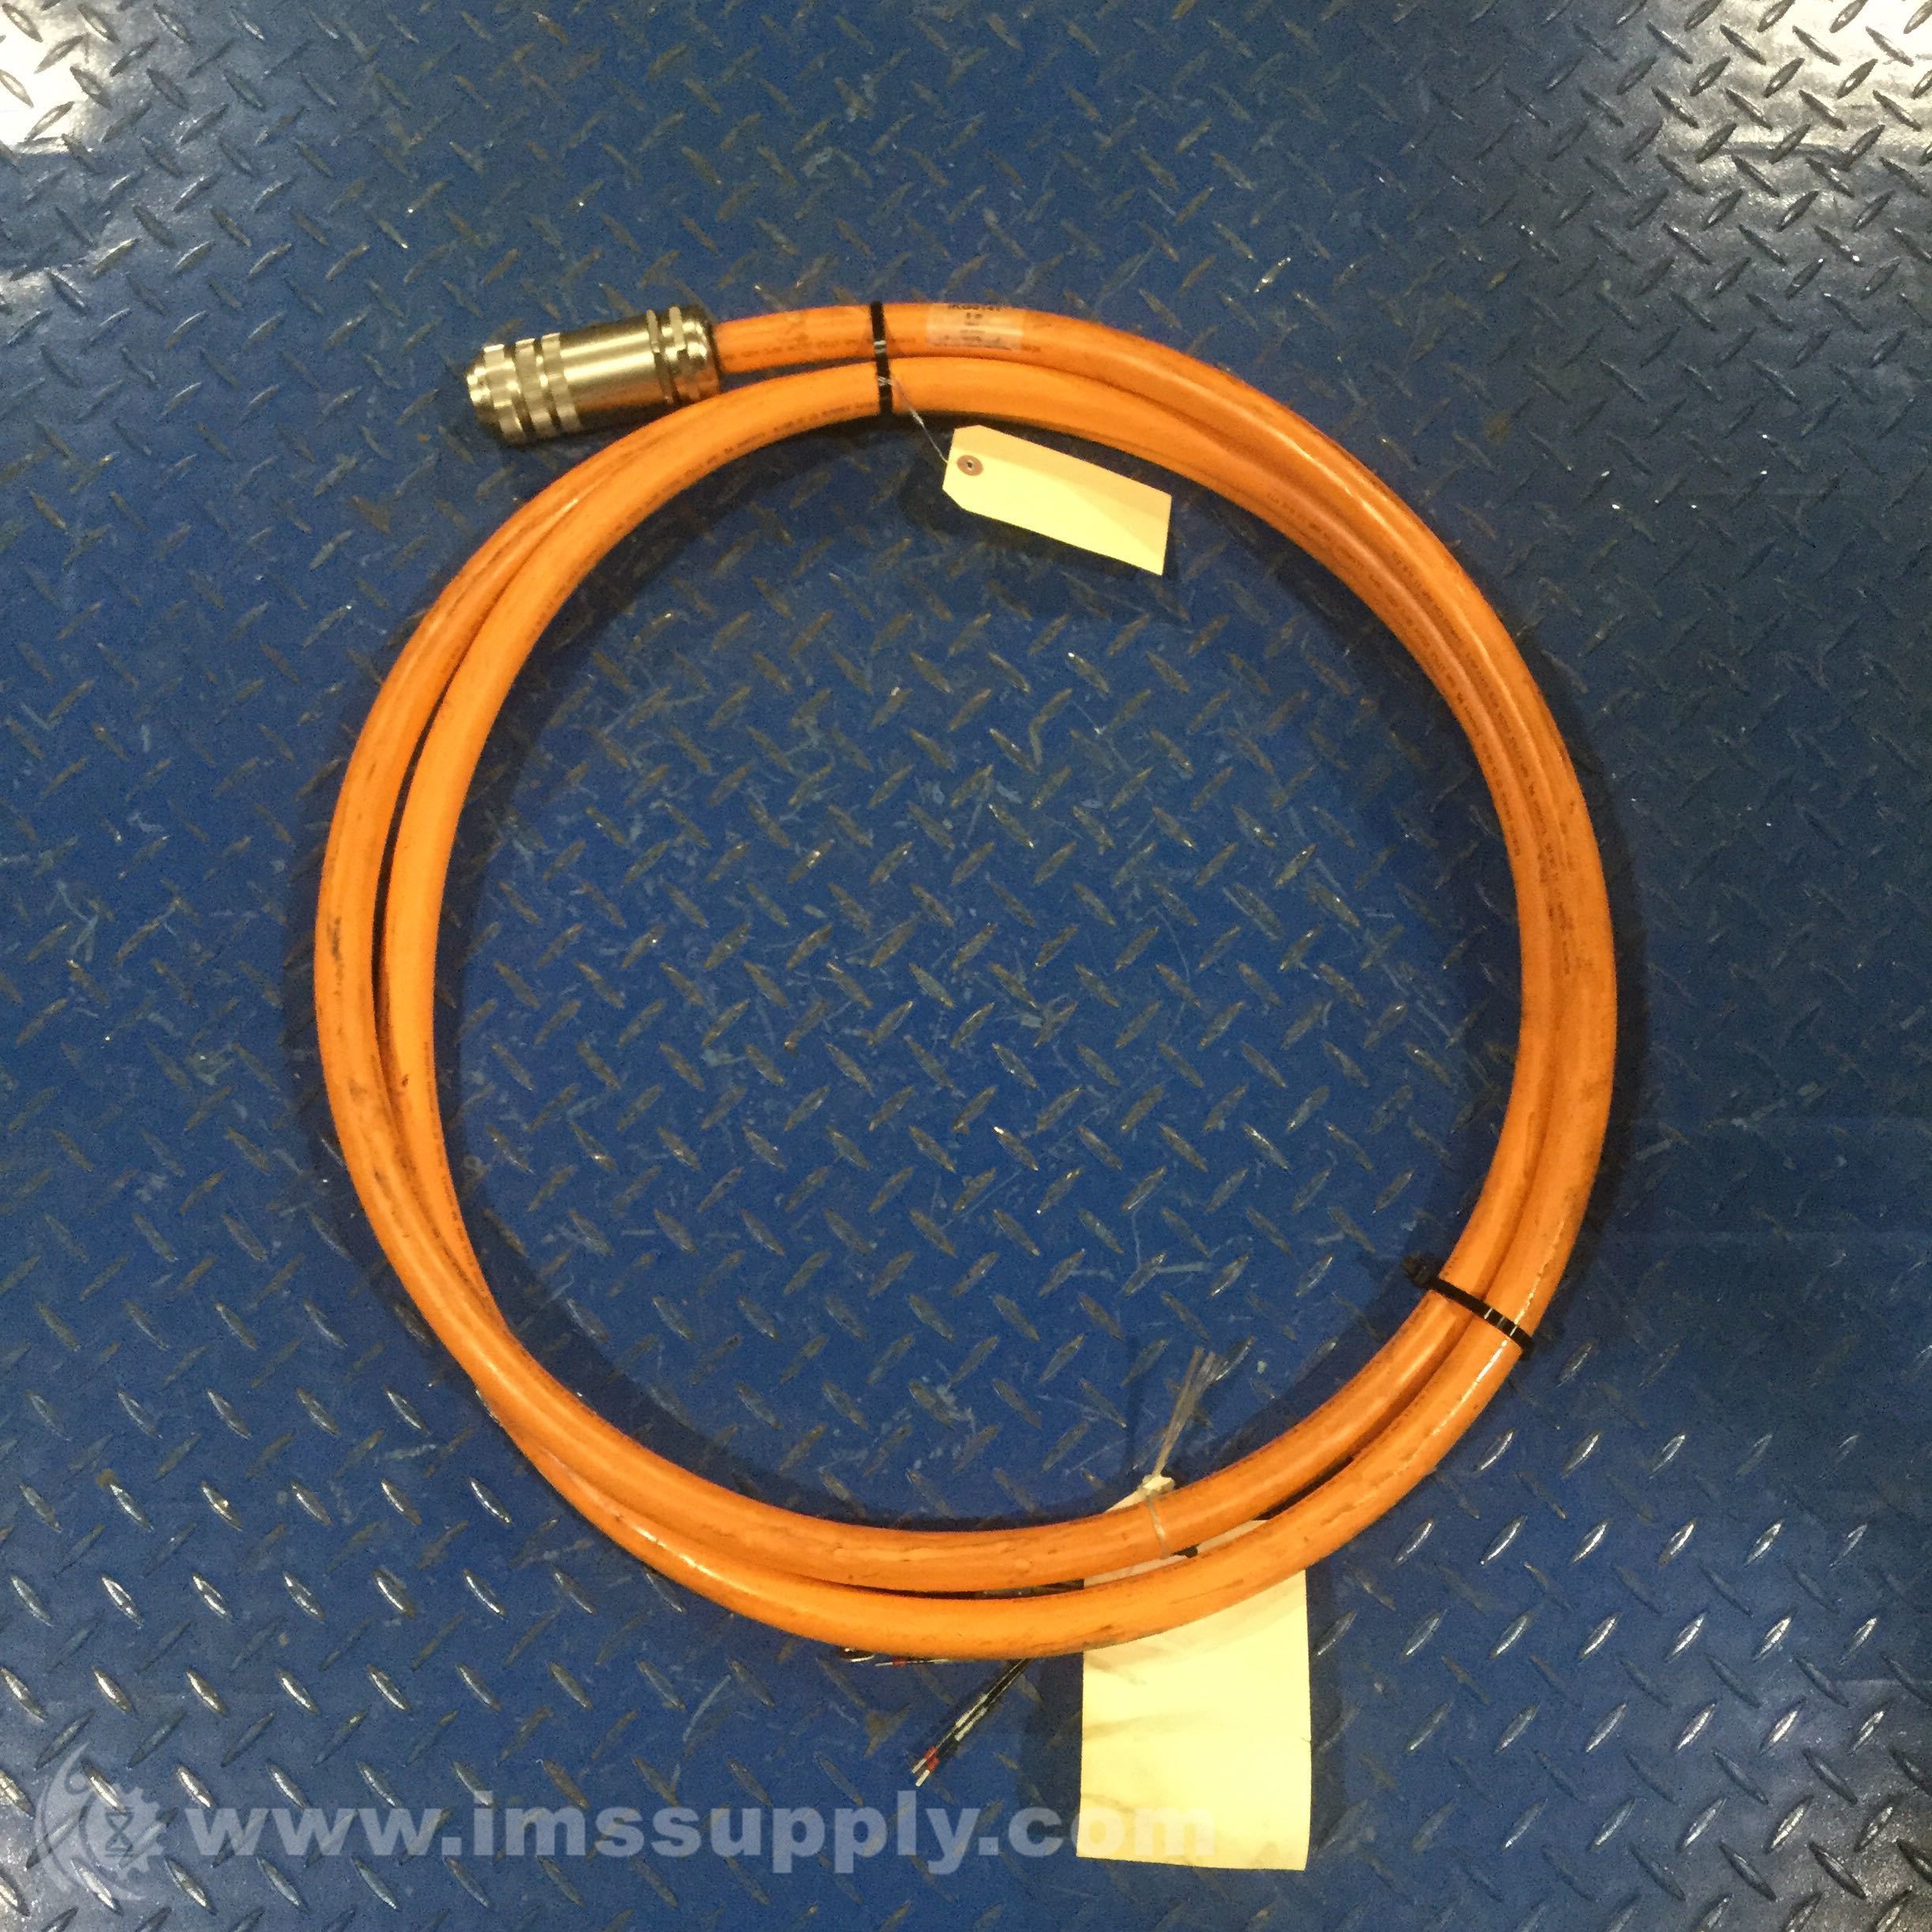 INDRAMAT MKD MOTOR ENCODER IKS4153 POWER CABLE IKG4016 